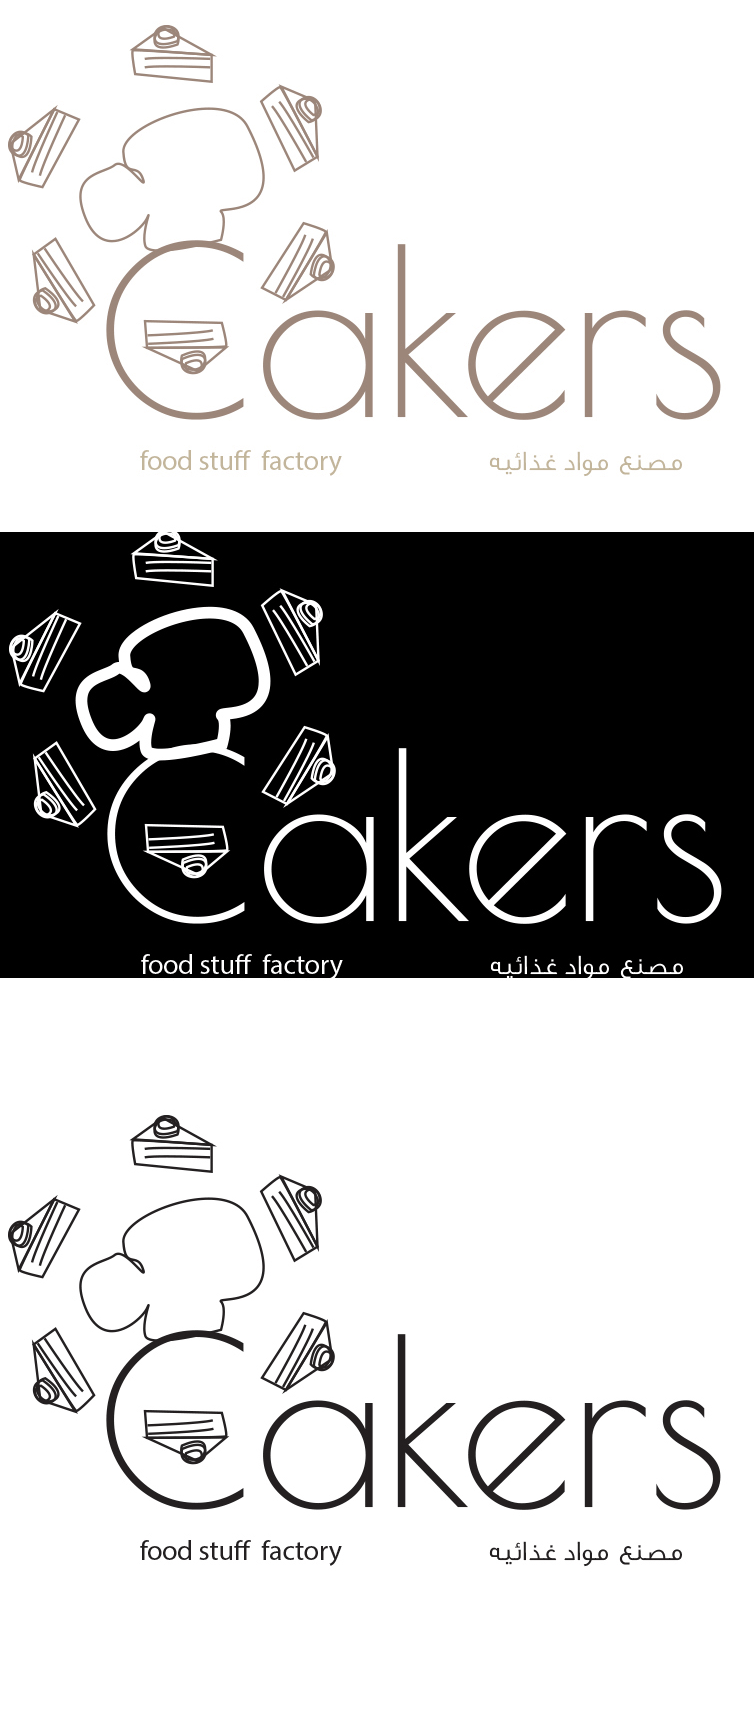 cakers option 1 logo variations